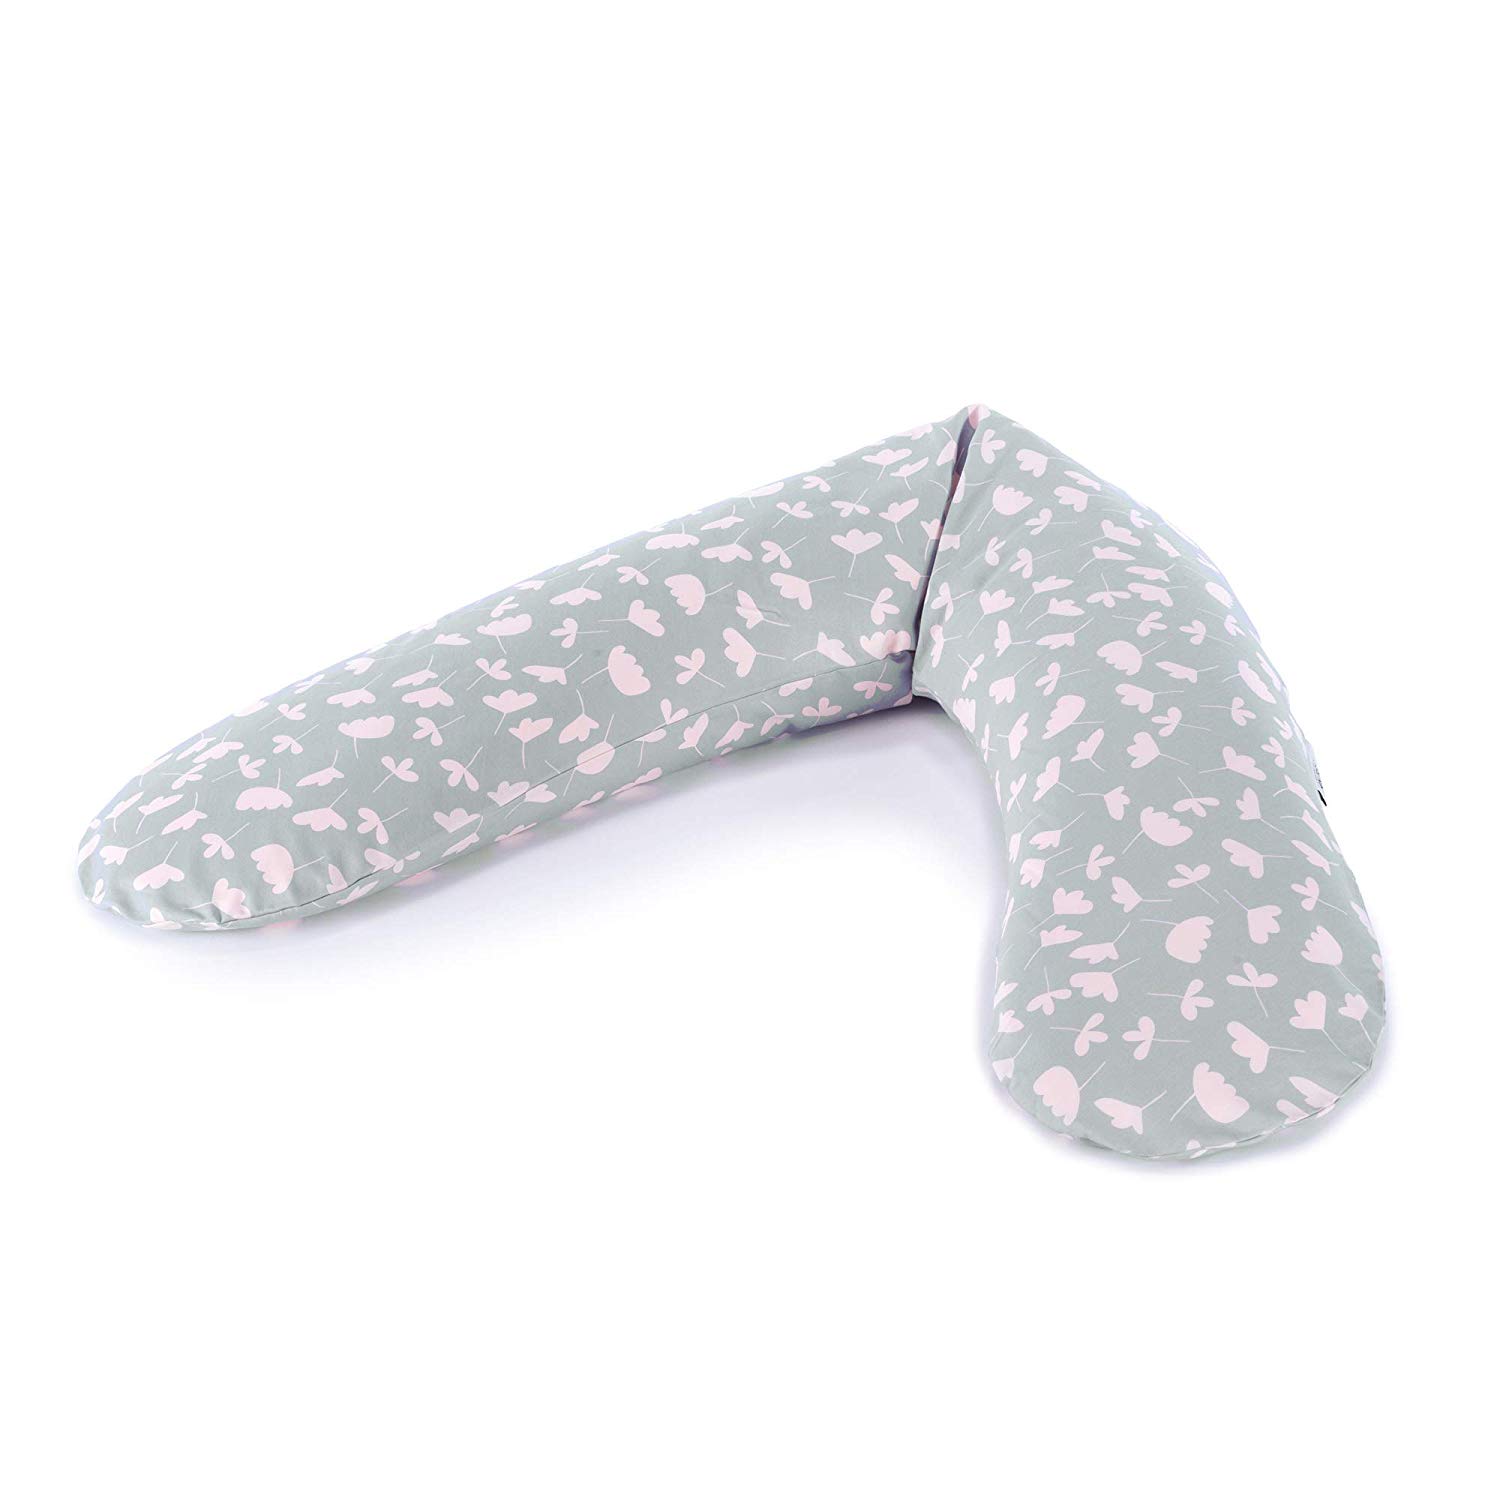 The Original Theraline Nursing Pillow 190 cm Micro Beads Filling Including Cover Soft Flowers